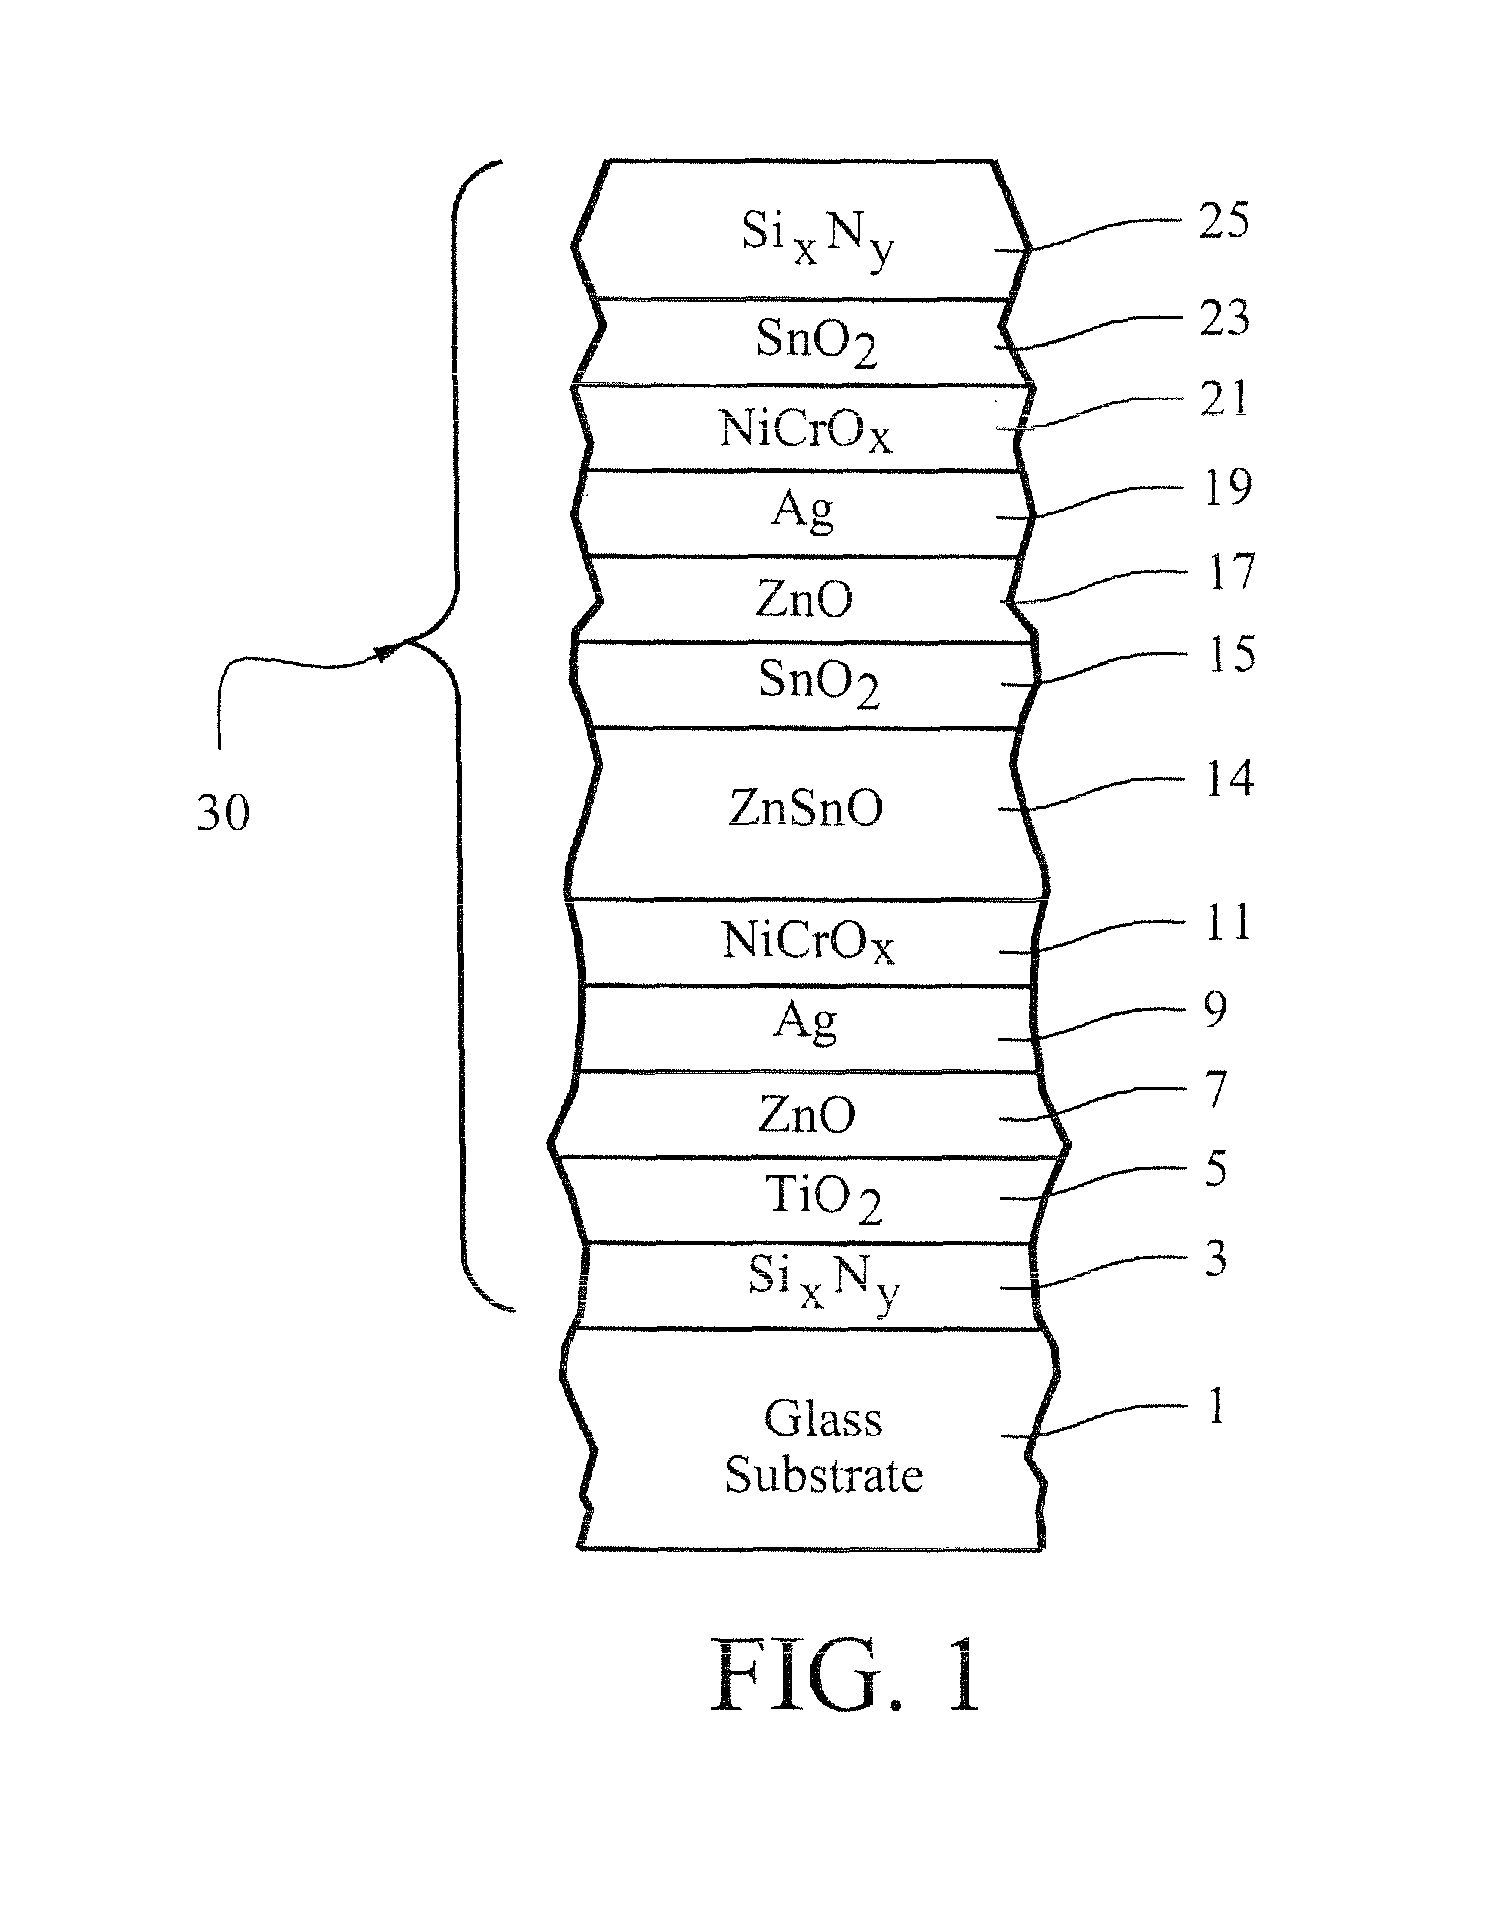 IG window unit including double silver coating having increased SHGC to U-value ratio, and corresponding coated article for use in IG window unit or other window